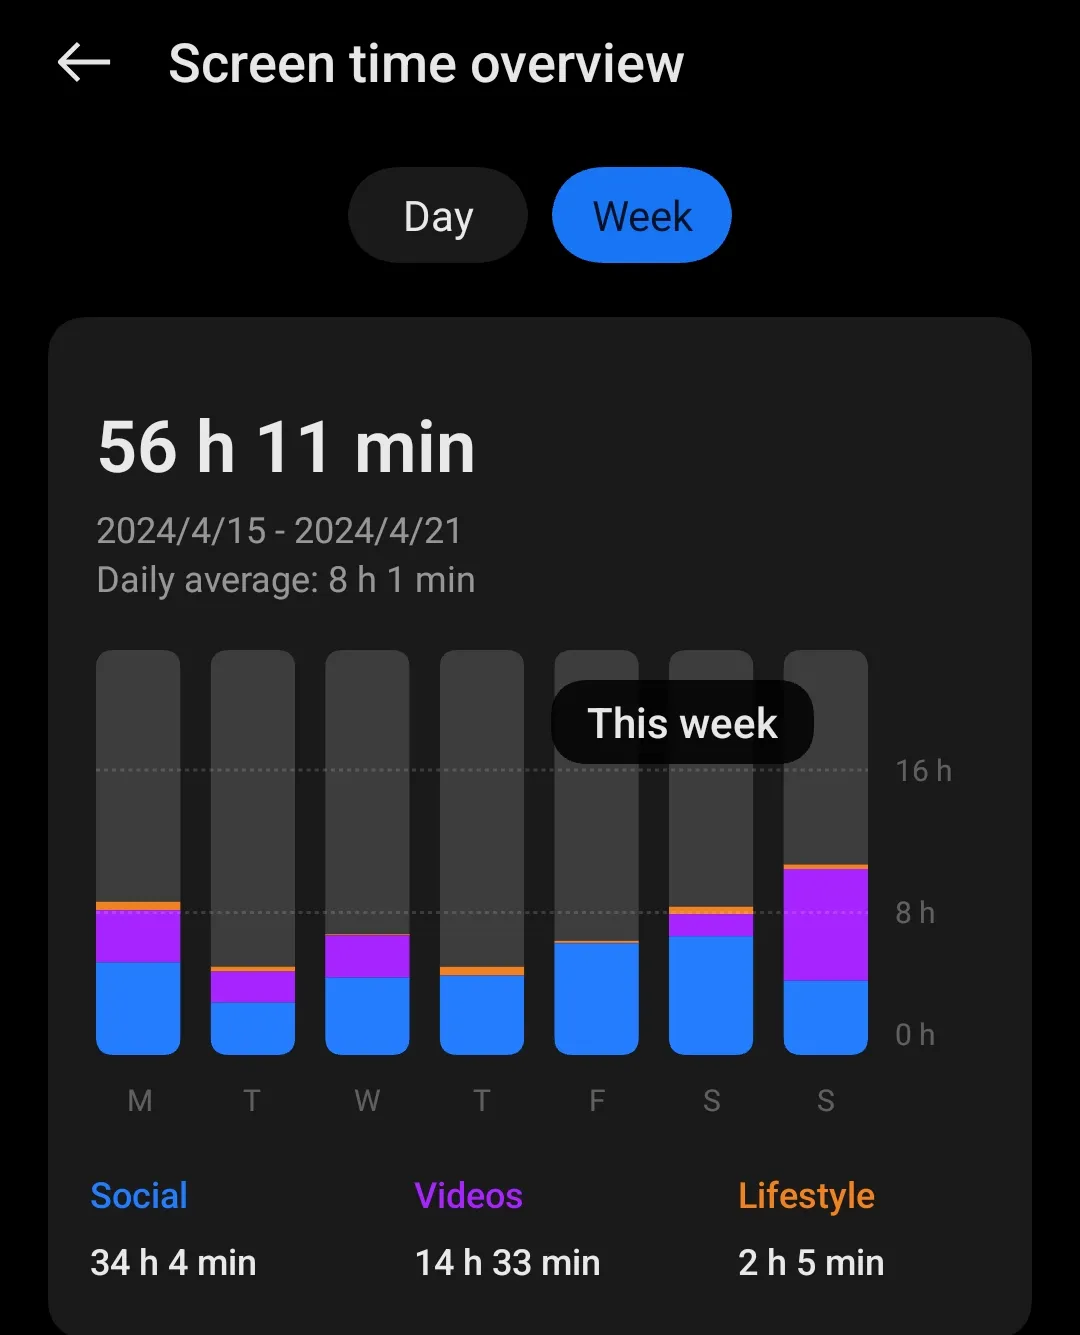 One week of screen time overview